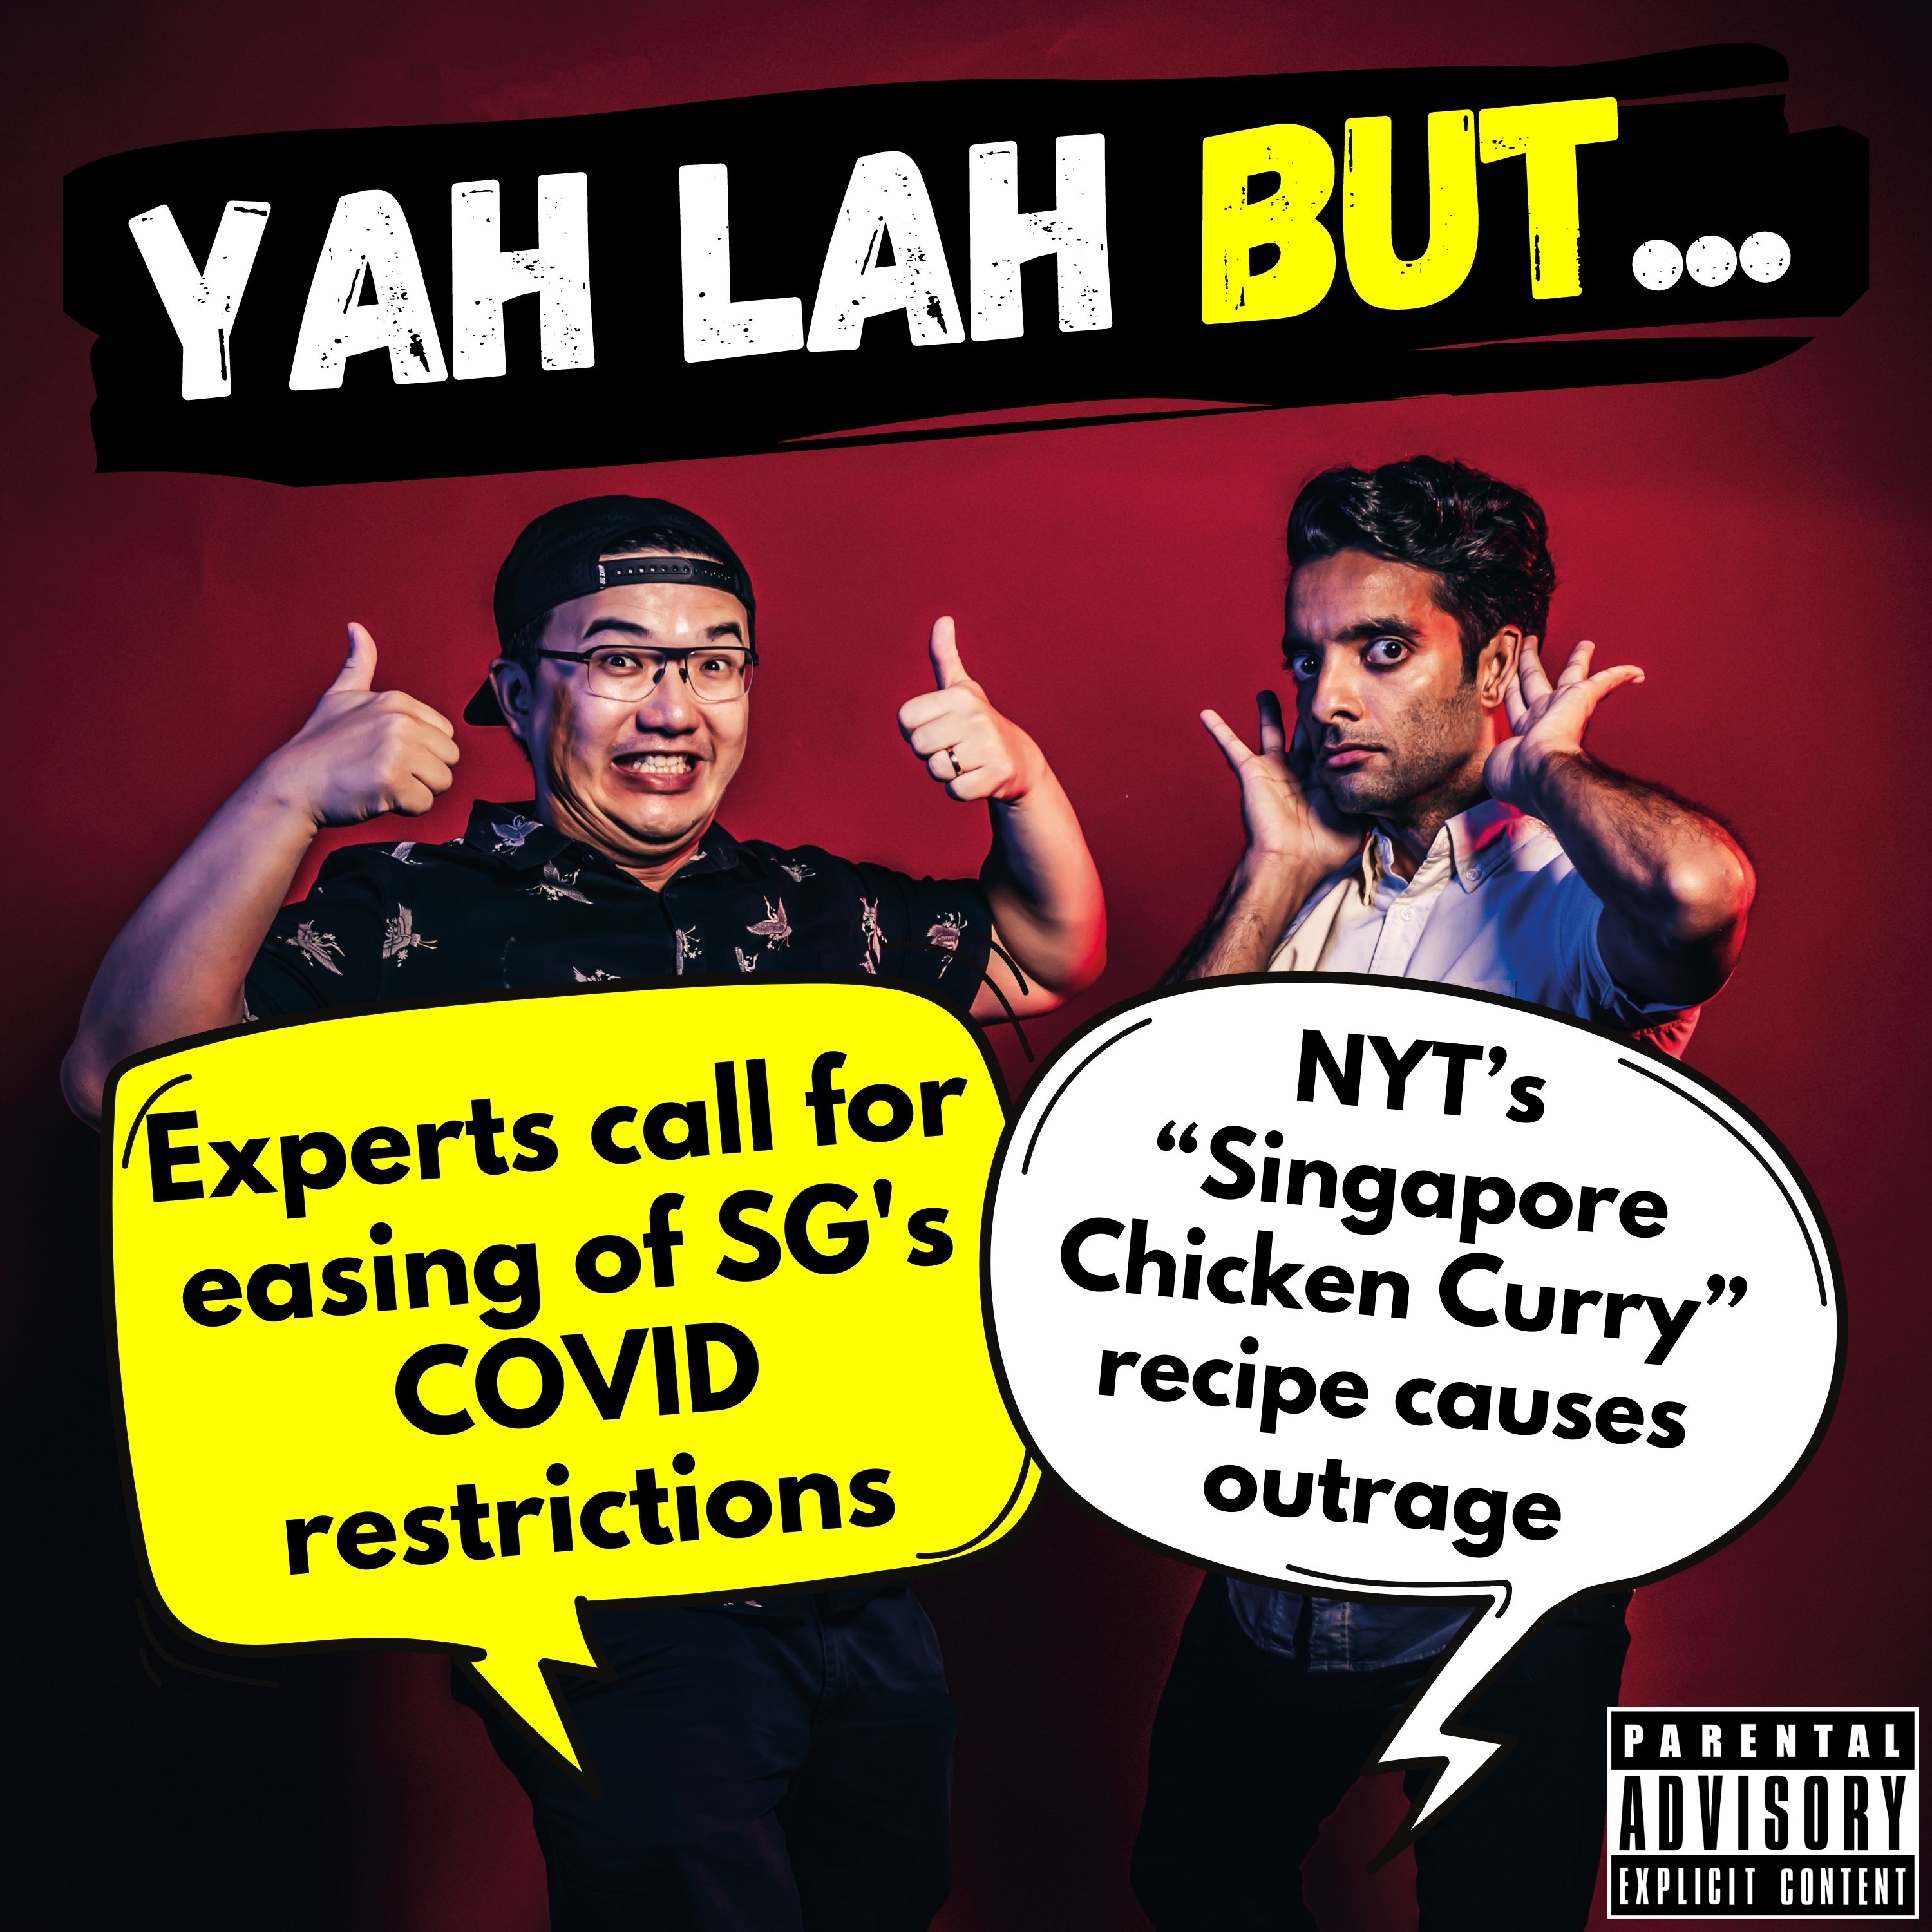 #258 - Experts call for easing of SG’s COVID restrictions & NYT’s “Singapore Chicken Curry” recipe causes outrage